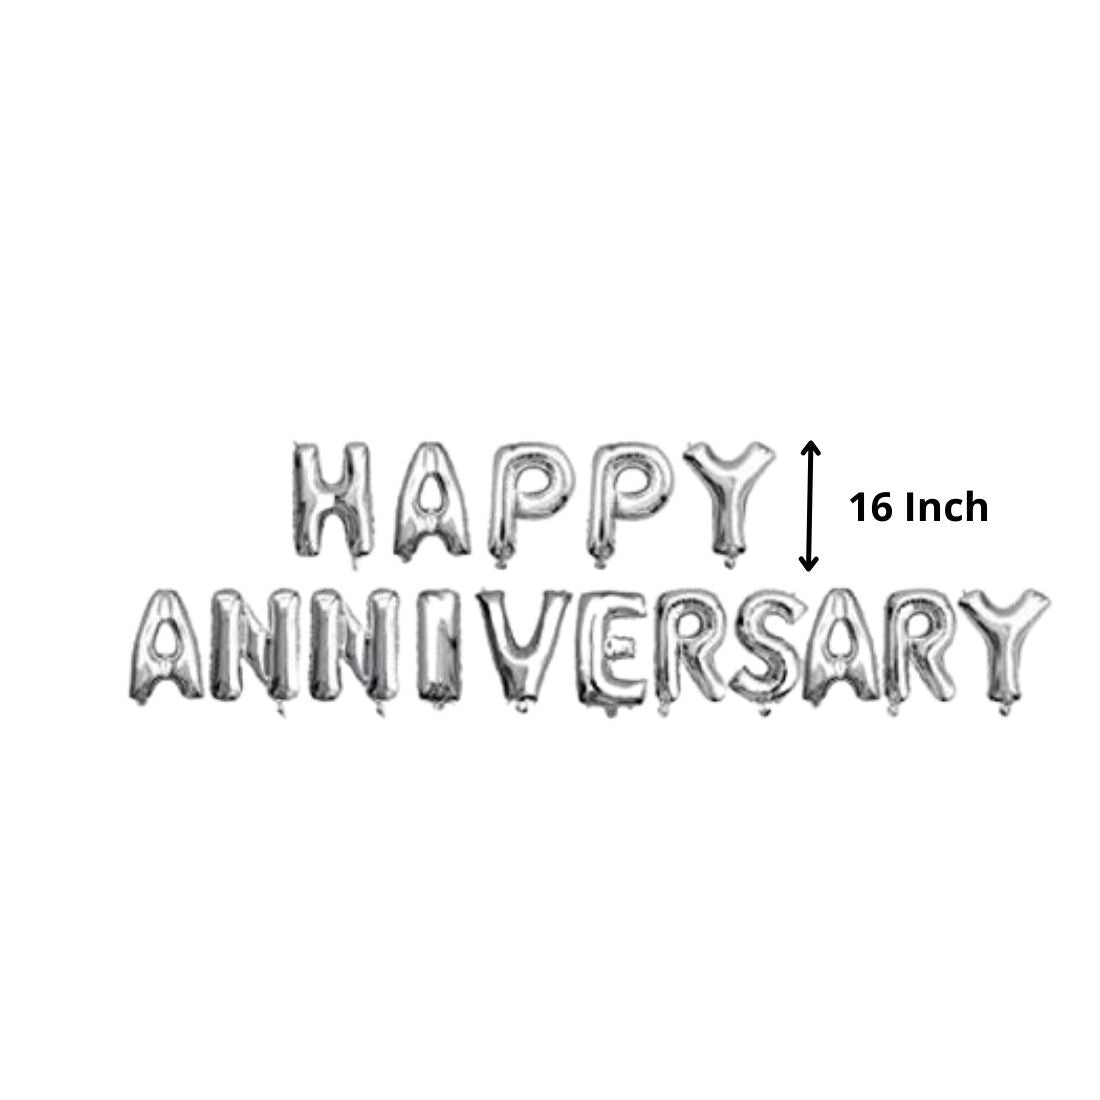 Happy Anniversary Decorations Silver Foil Balloon for Home Decoration 16"Size for Husband Wife/ Anniversary Celebration Balloons